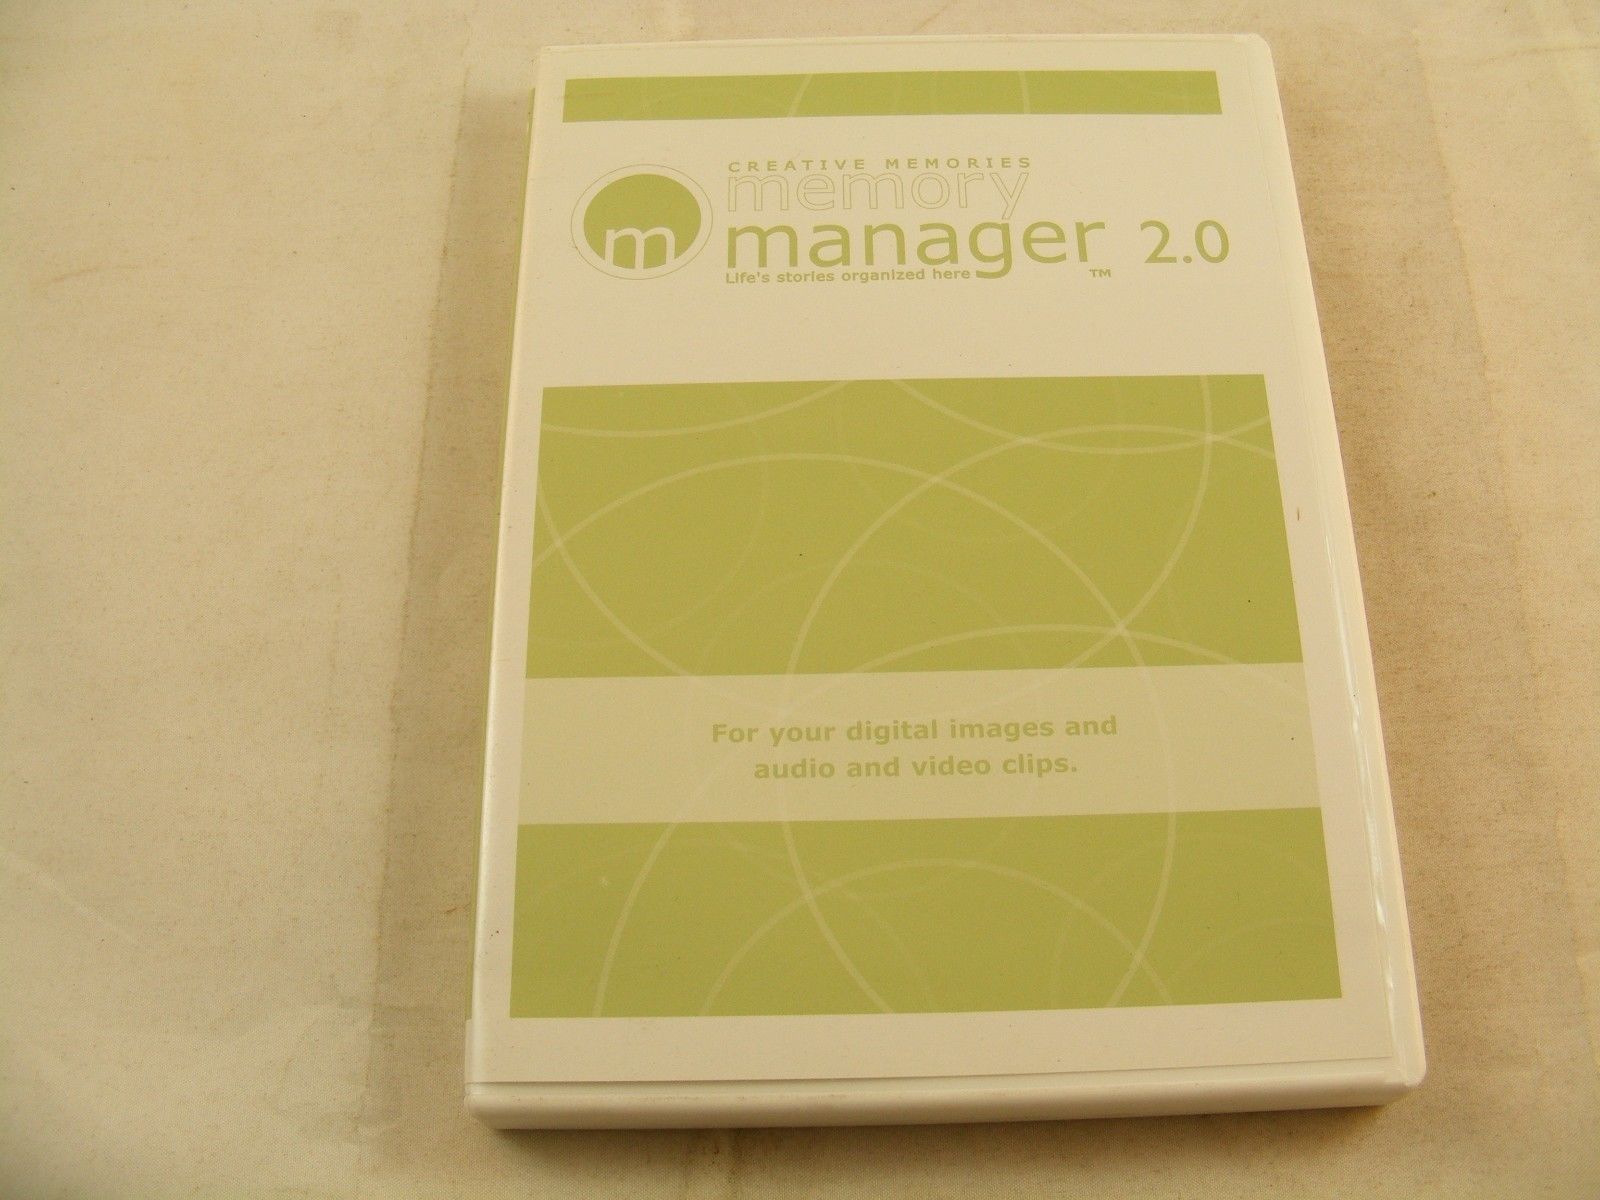 CREATIVE MEMORIES memory manager 2.0 software CD - Excellent Condition ! - $1.89